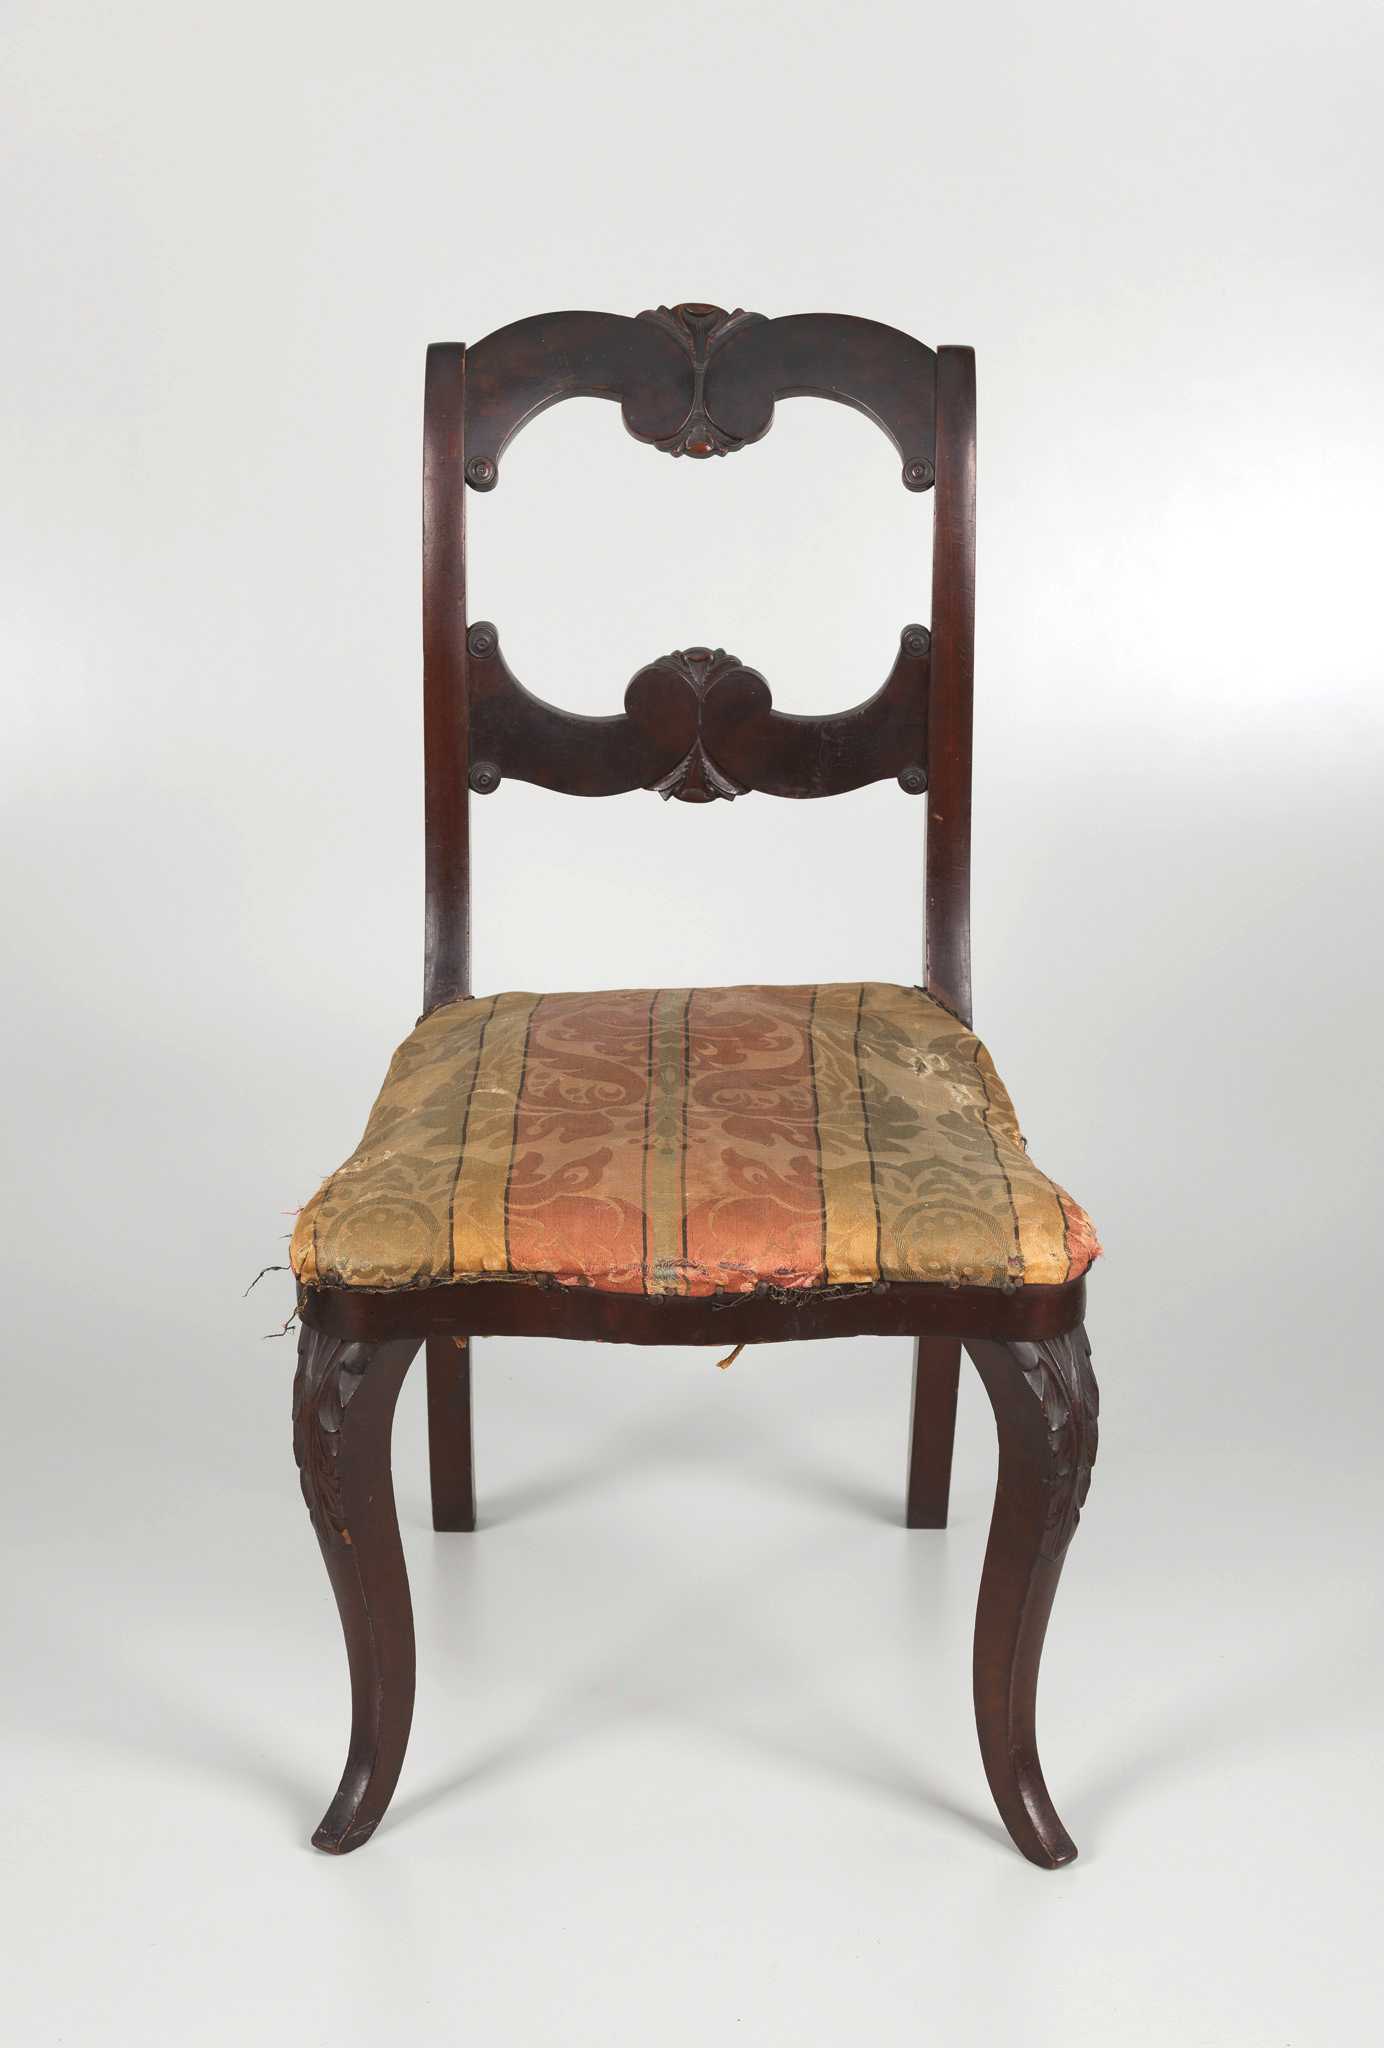 Side chair created by Thomas Day. The chair has mahogany legs and back with scroll and floral detailing. There is an engraved floral motif on the center top rail. The seat is upholstered and filled with burlap. The fabric has cream, green, and red striped sections with black borders and an overall floral motif. The upholstery is worn with small areas of loss. The chairs springs are visible through the loose fabric backing below the seat.